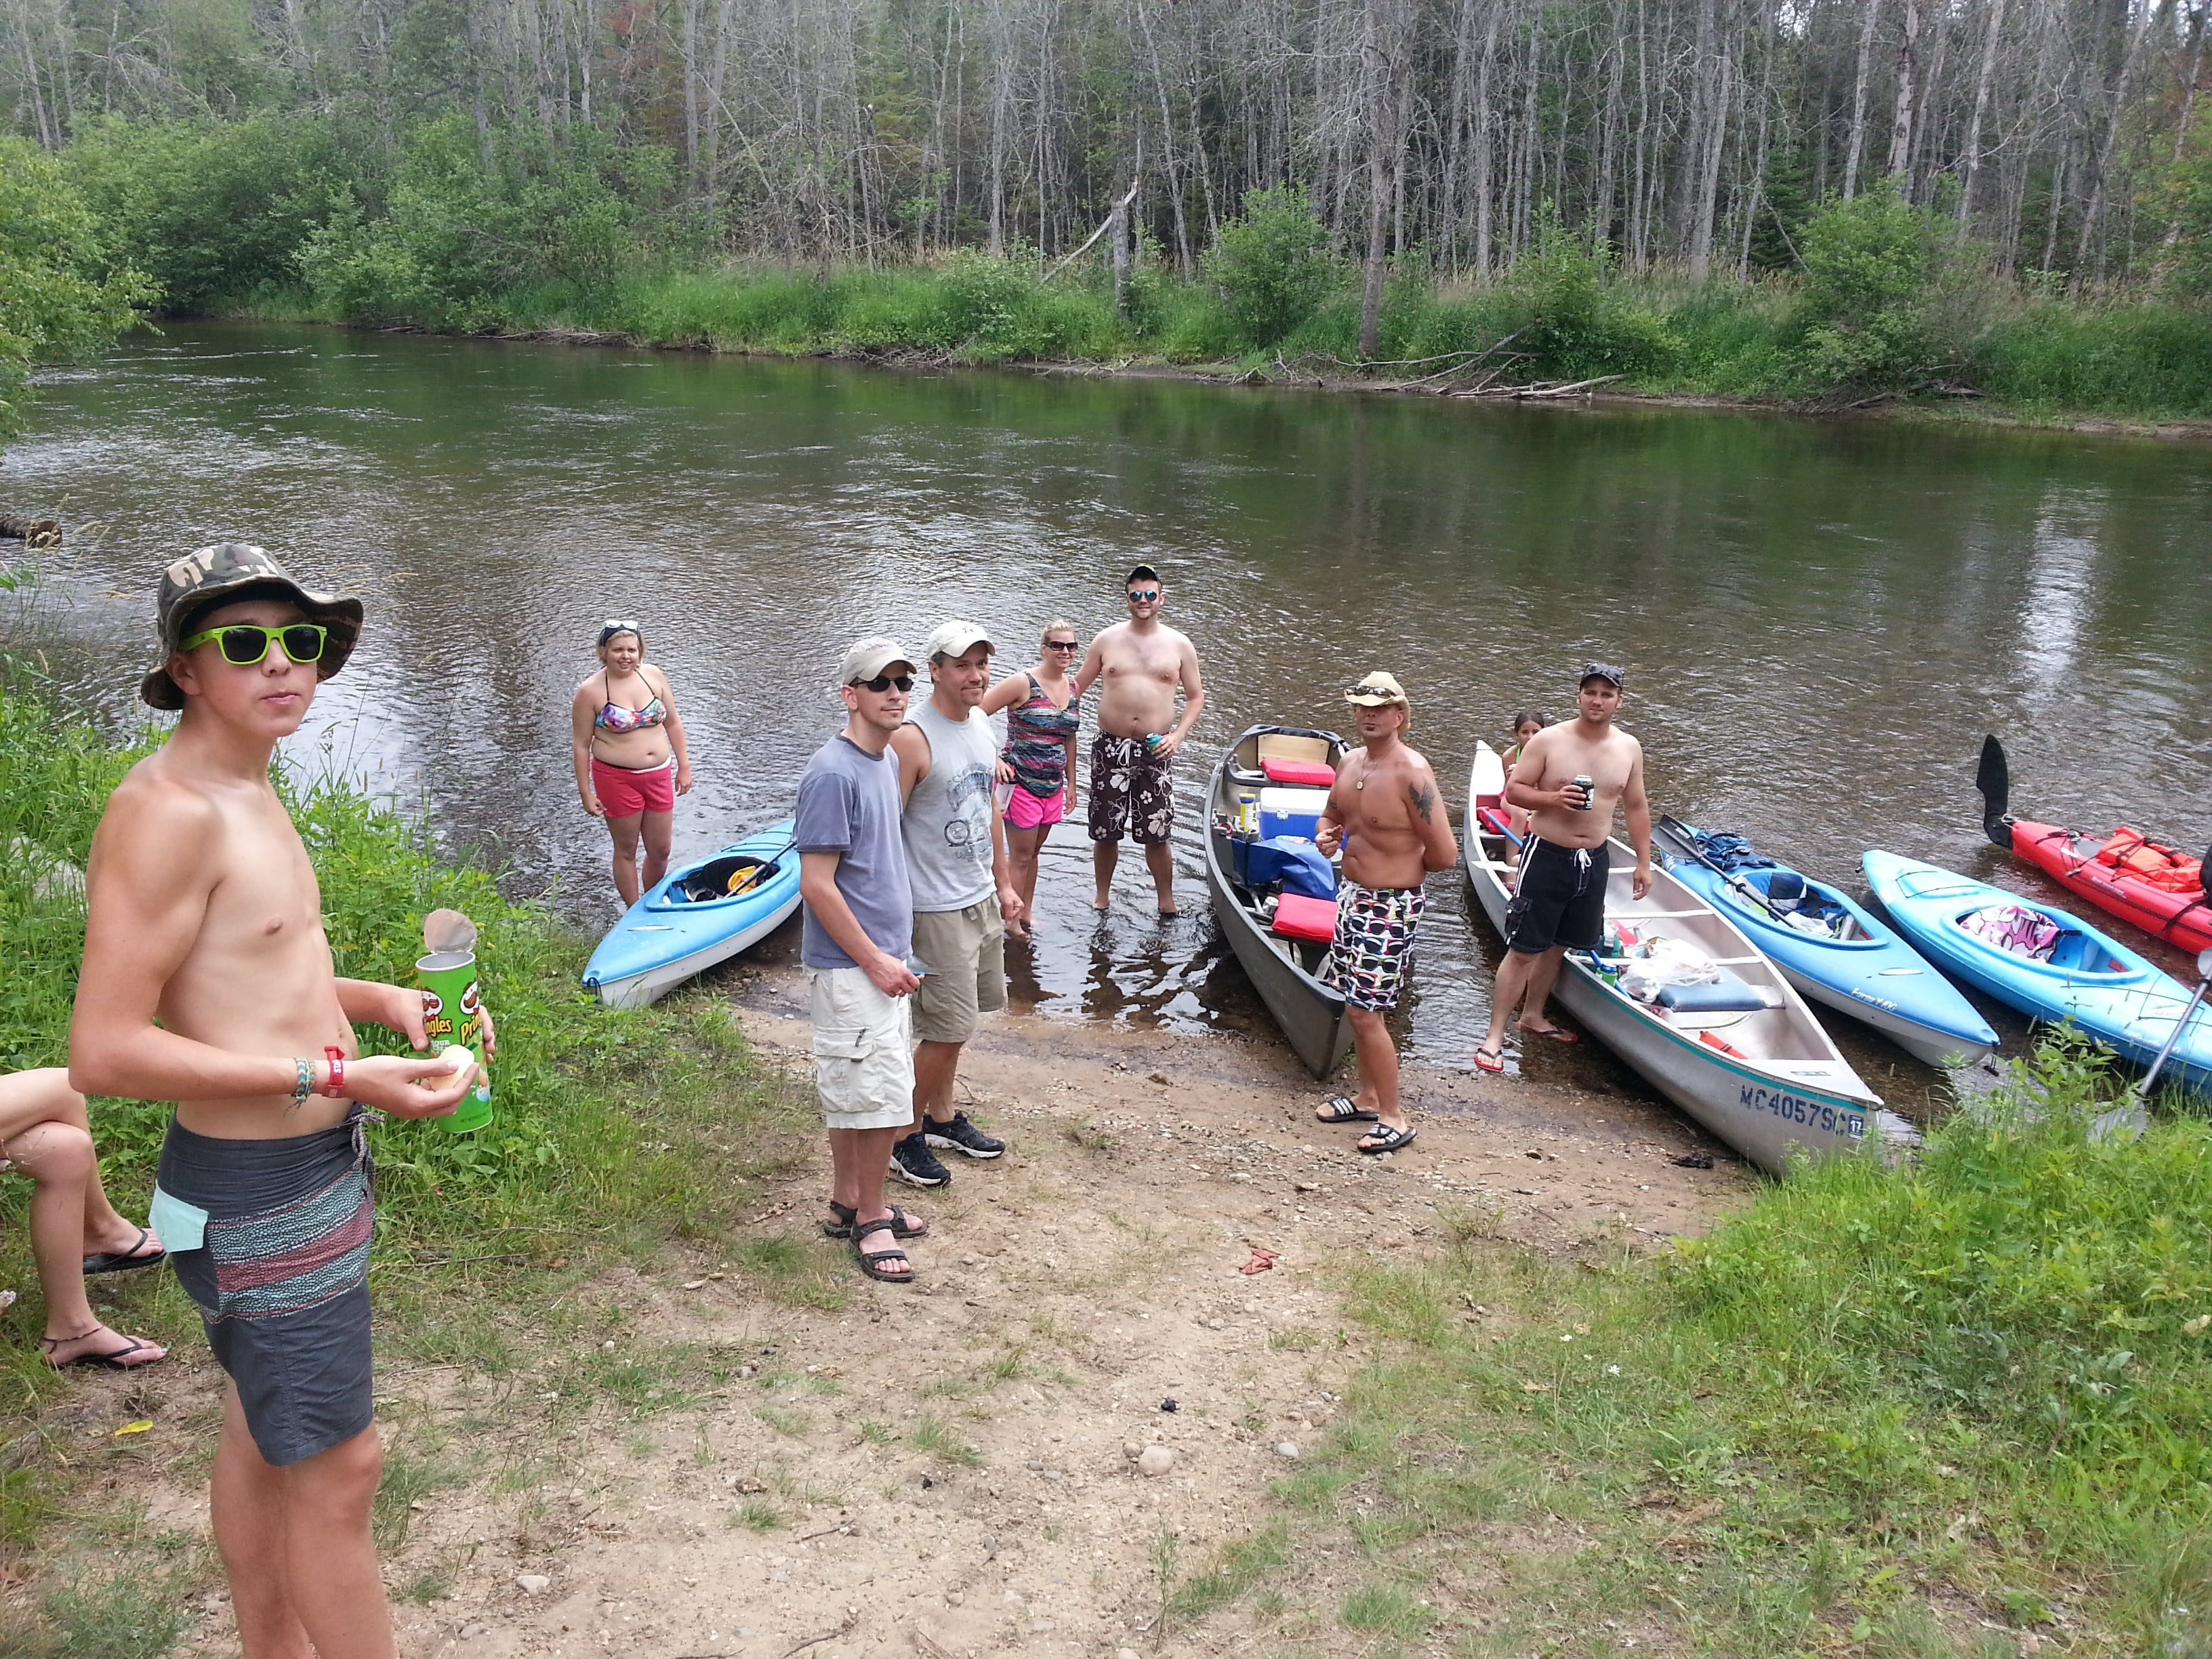 We did a group kayak trip down the Au Sable river